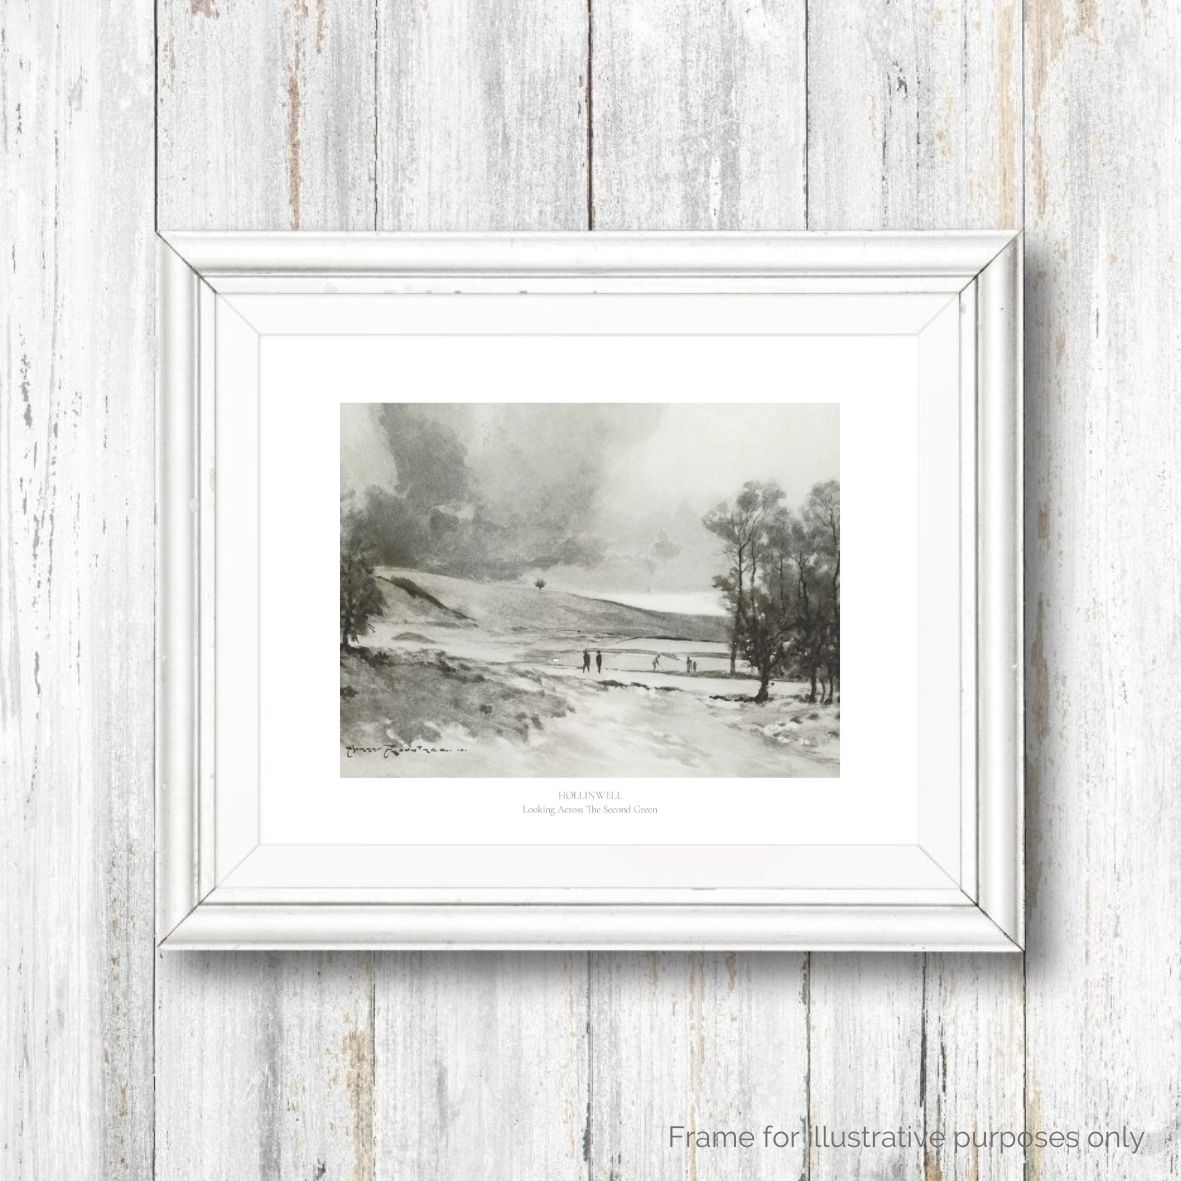 Framed Print of Hollinwell by Harry Rountree